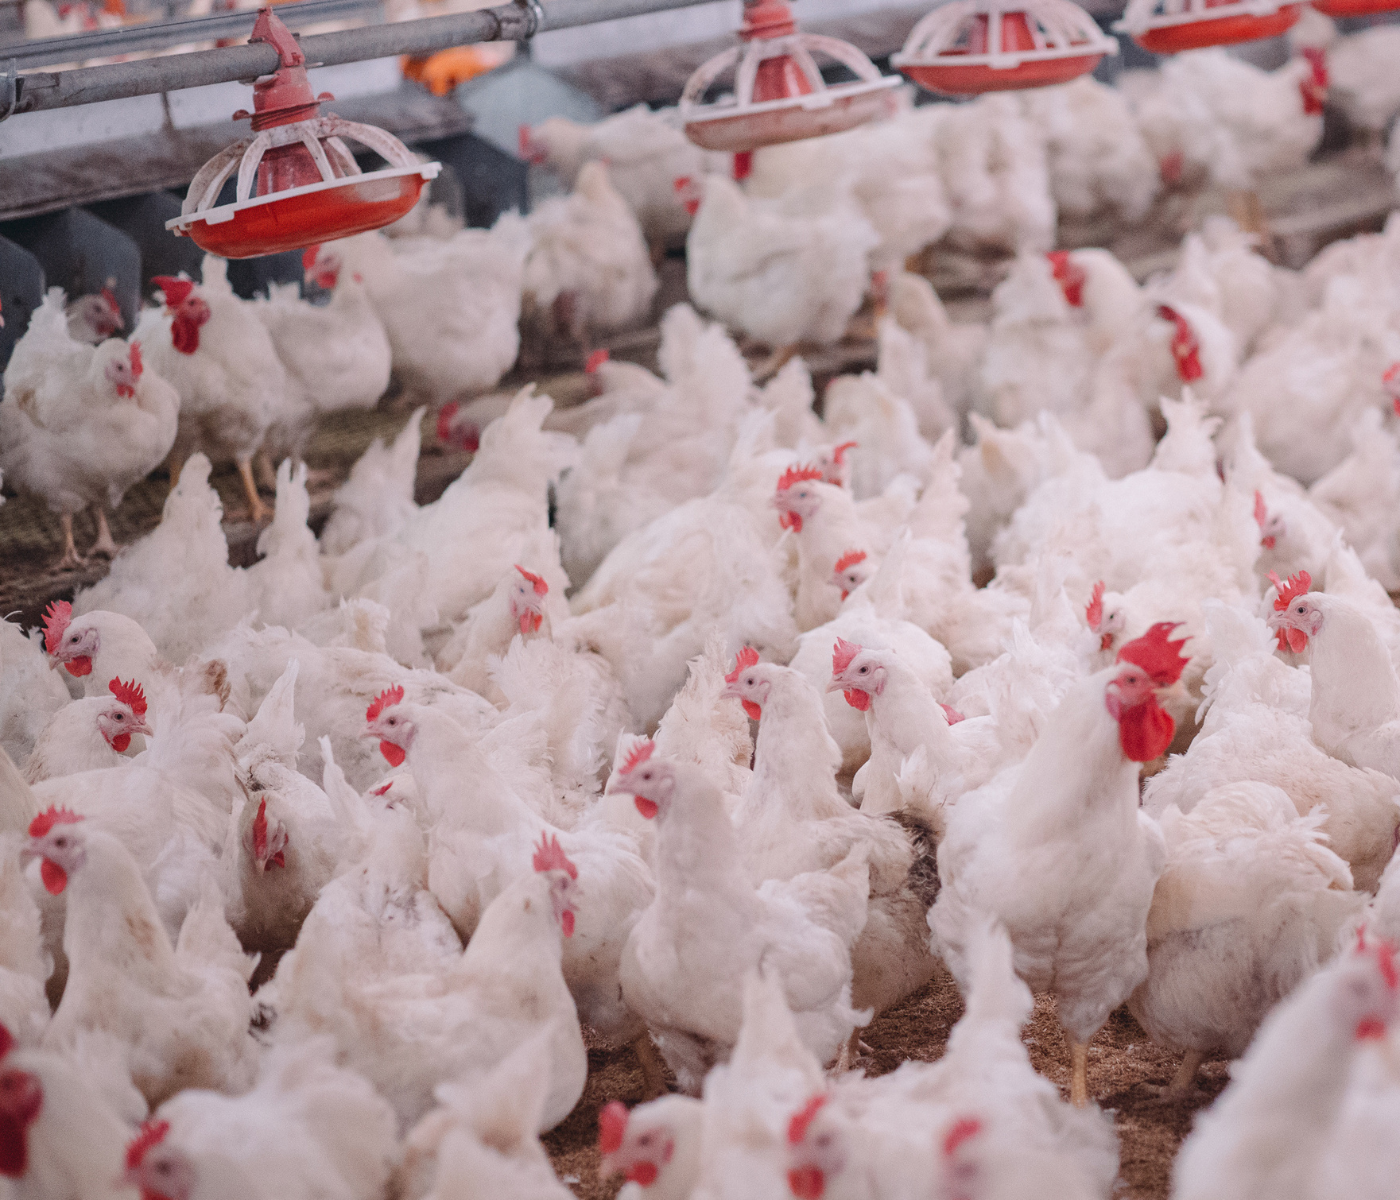 Malaysian chicken breeders hit by the export ban